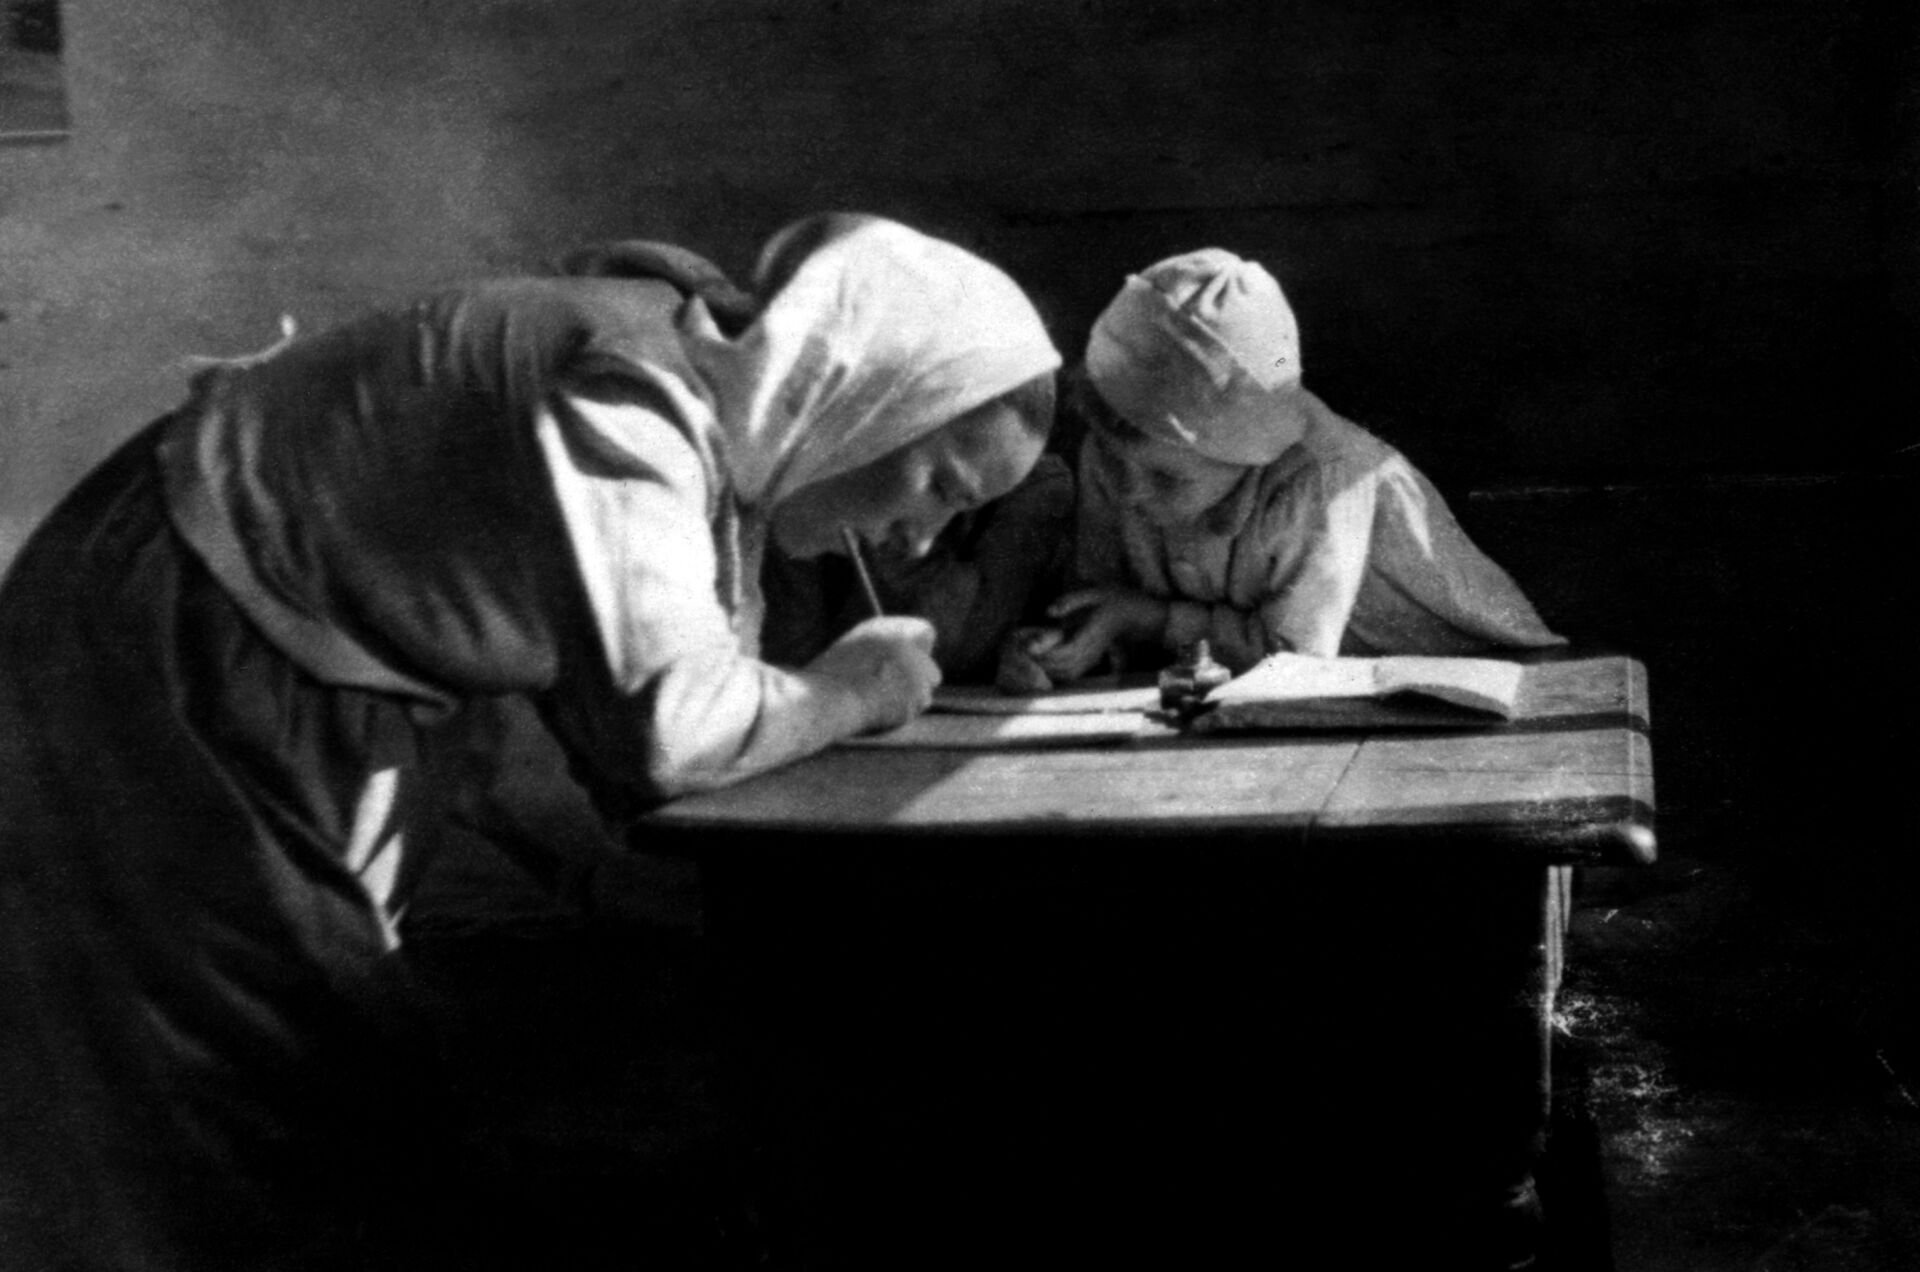 Wiktoria Ulma is pictured writing at a table with her oldest daughter, Stasia. Józef and Wiktoria Ulma secretly gave shelter to eight Jews for almost two years in German-occupied Poland, hiding them from the murderous Nazi regime during the Second World War. The Ulmas are on the path to beatification with the Vatican declaring them martyrs Dec. 17, 2022. The Nazis killed the family and the Jews they were sheltering early in the morning March 24, 1944, right before Easter. (OSV NEWS photo/courtesy Polish Institute of National Remembrance)